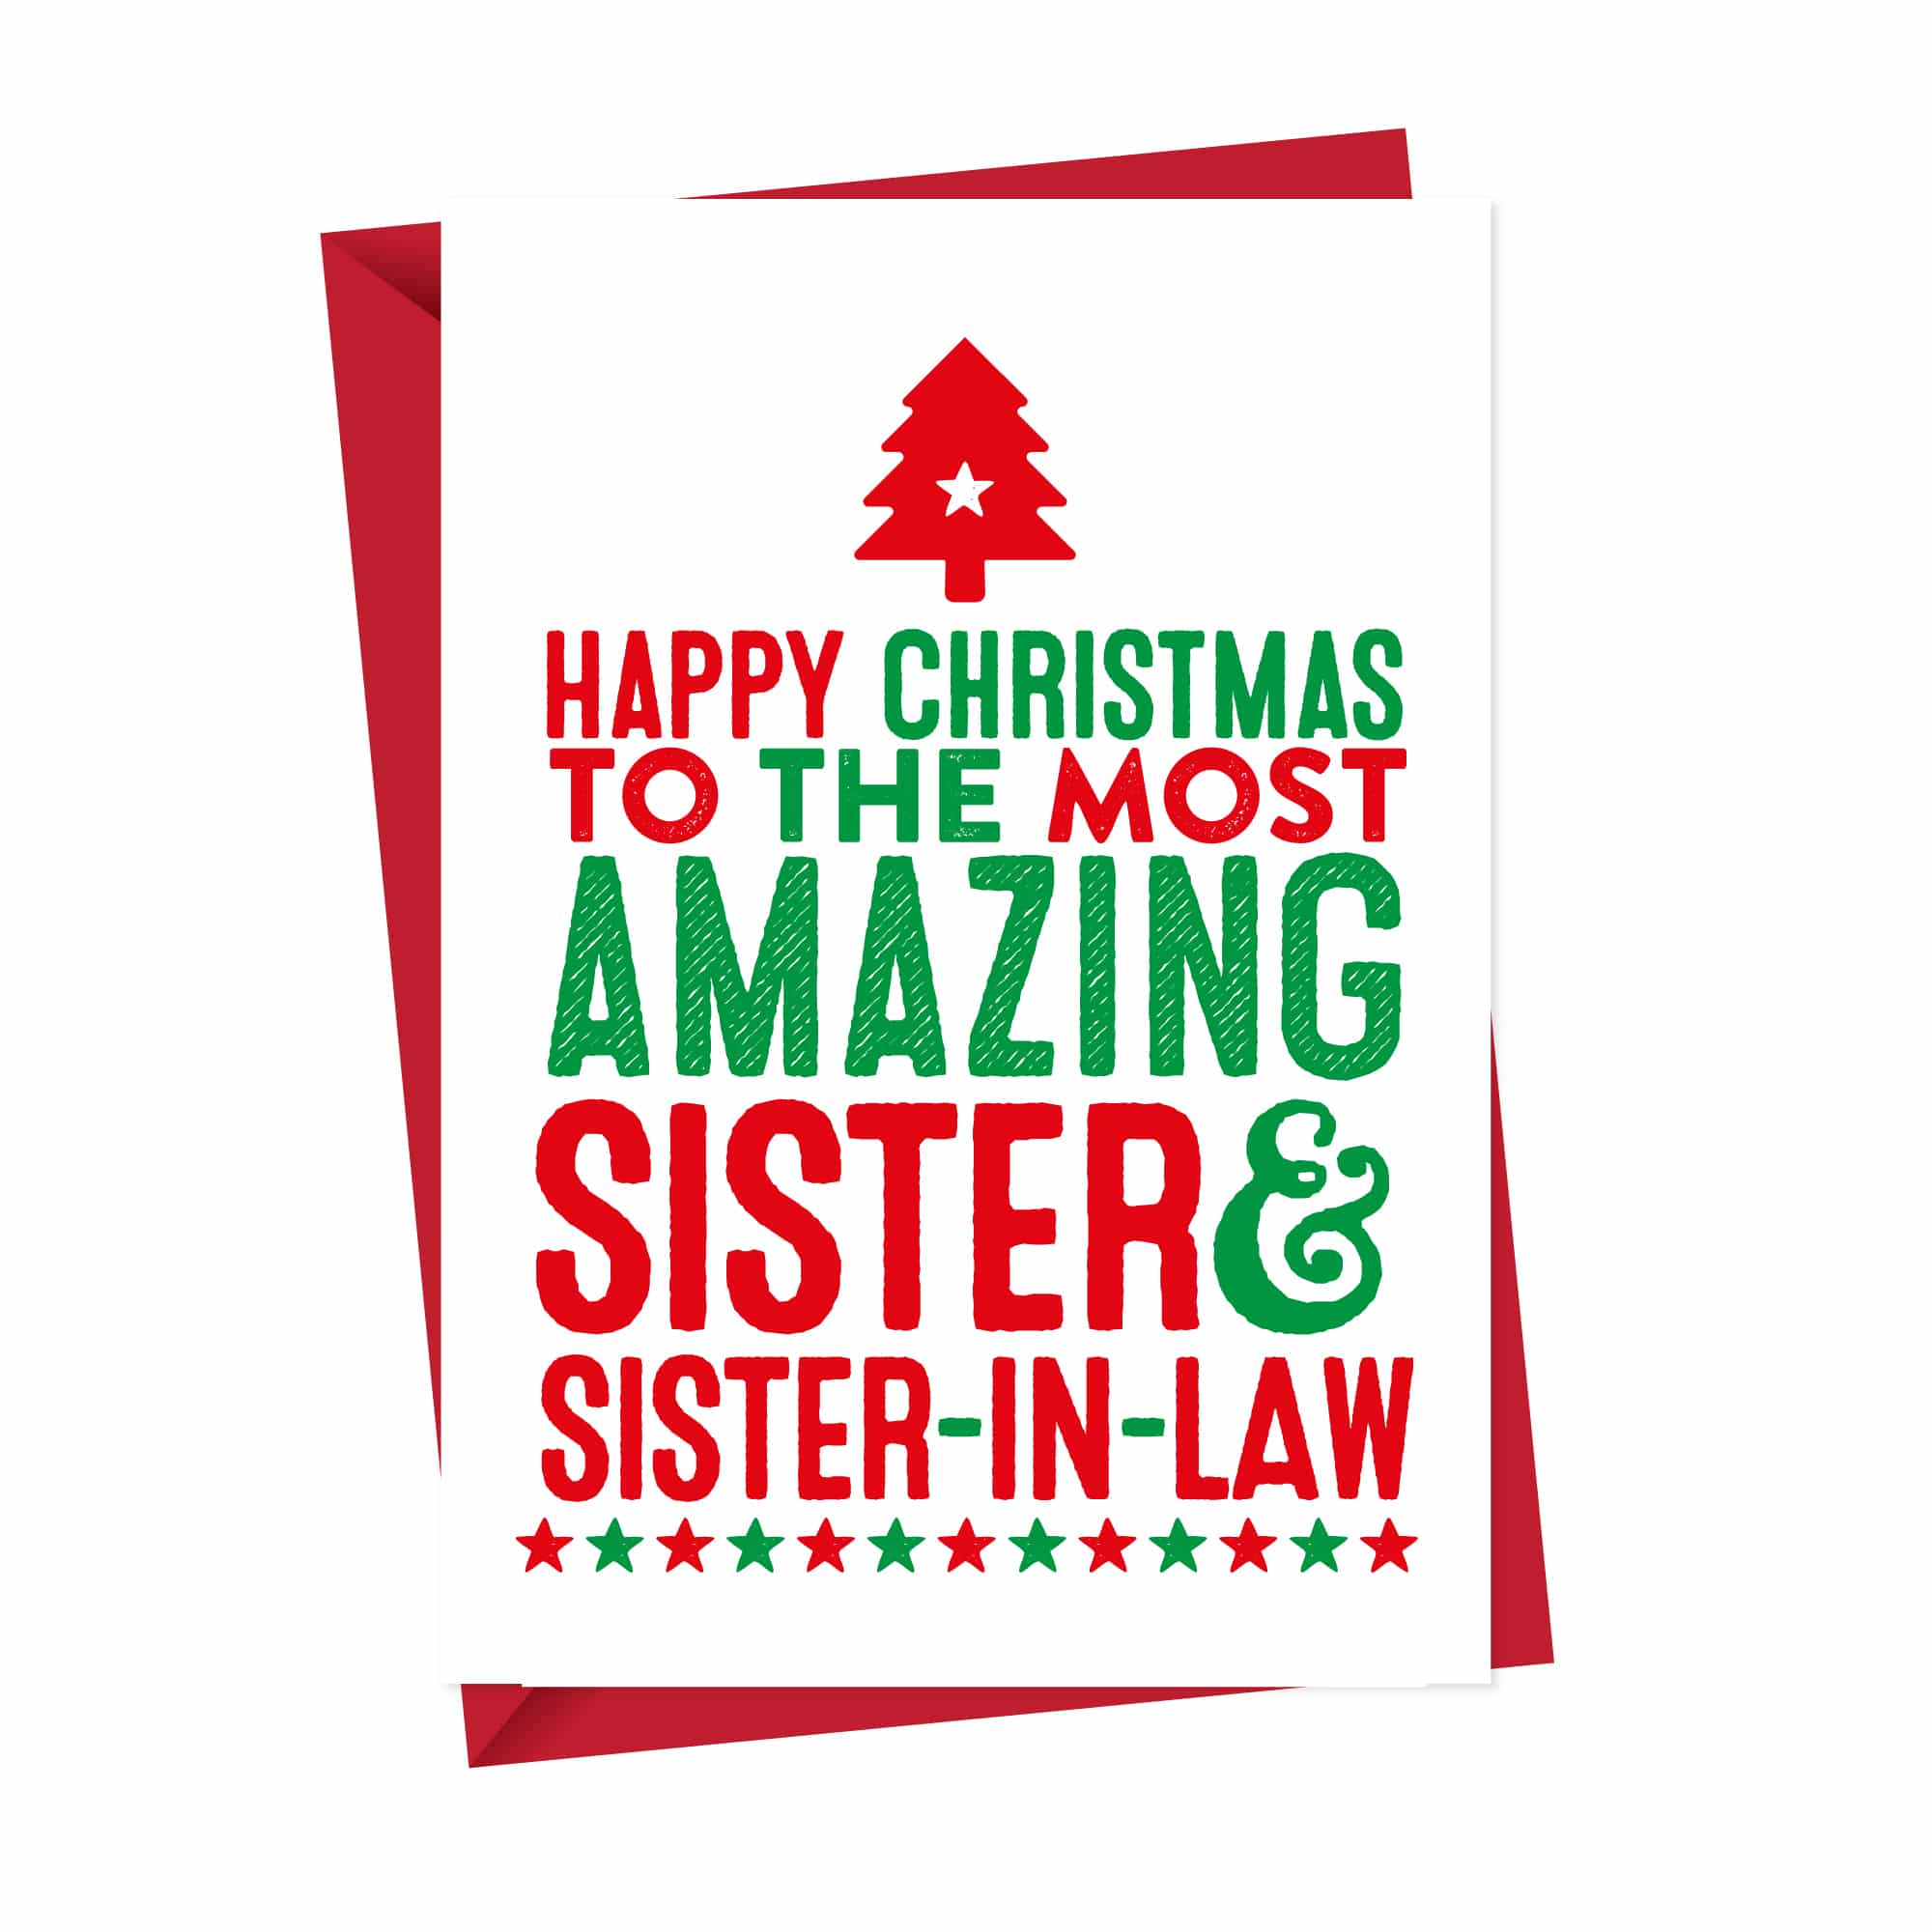 Amazing Sister and Sister in Law Christmas Card